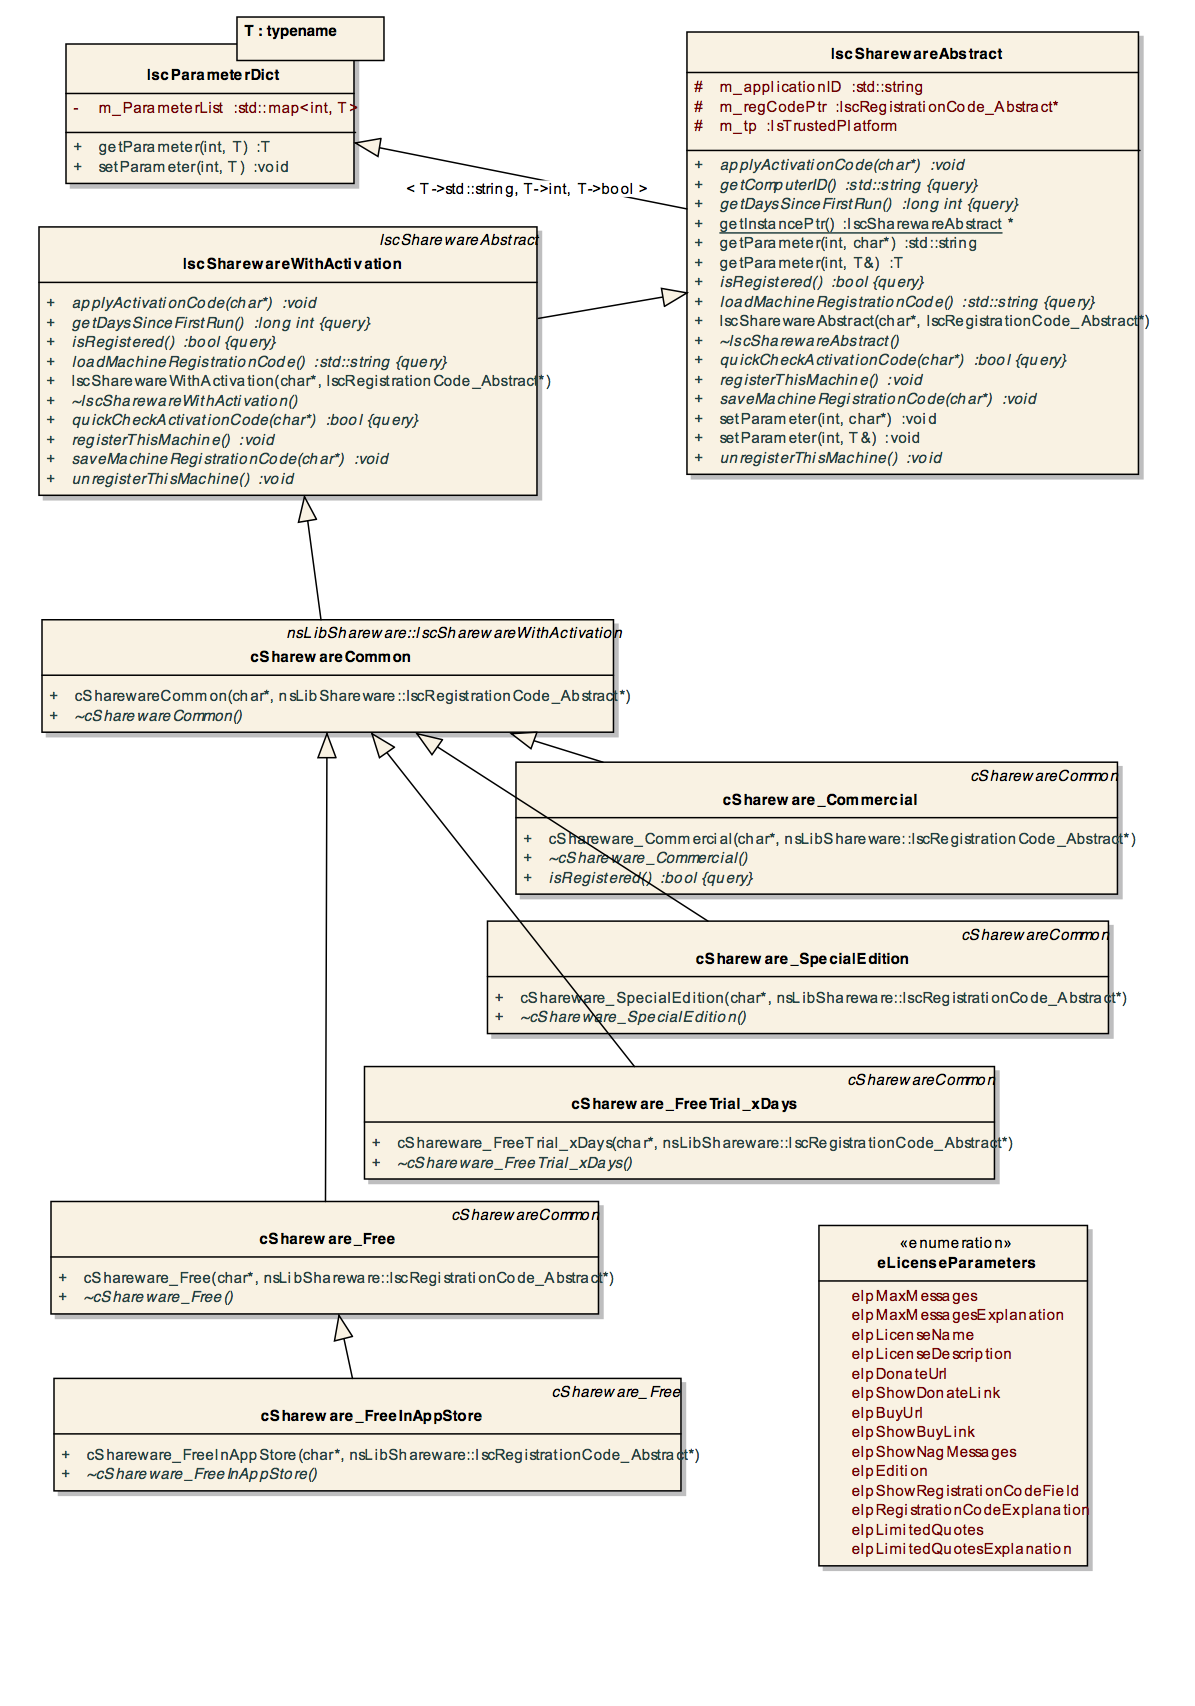 Class diagram of the C++ shareware library for software activation and registration